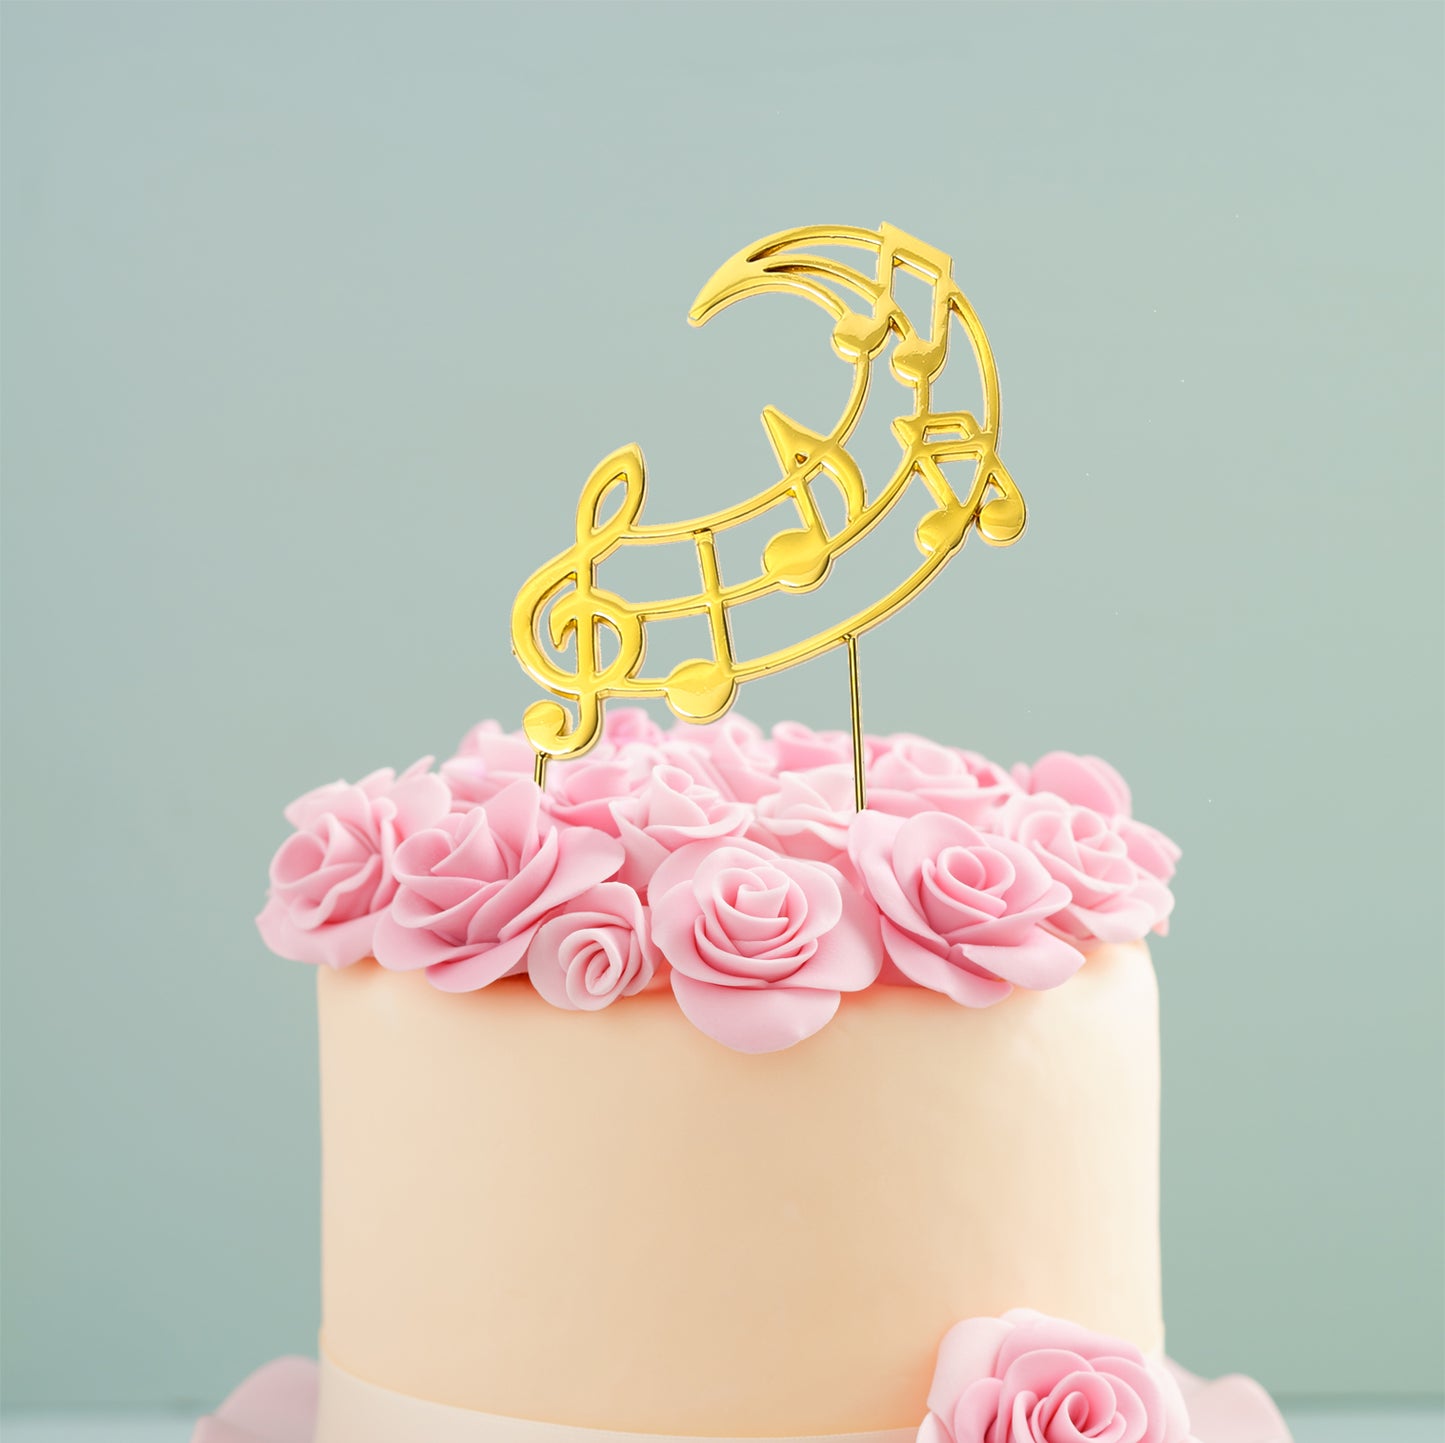 GOLD PLATED CAKE TOPPER - MUSIC NOTES GOLD TOPPER